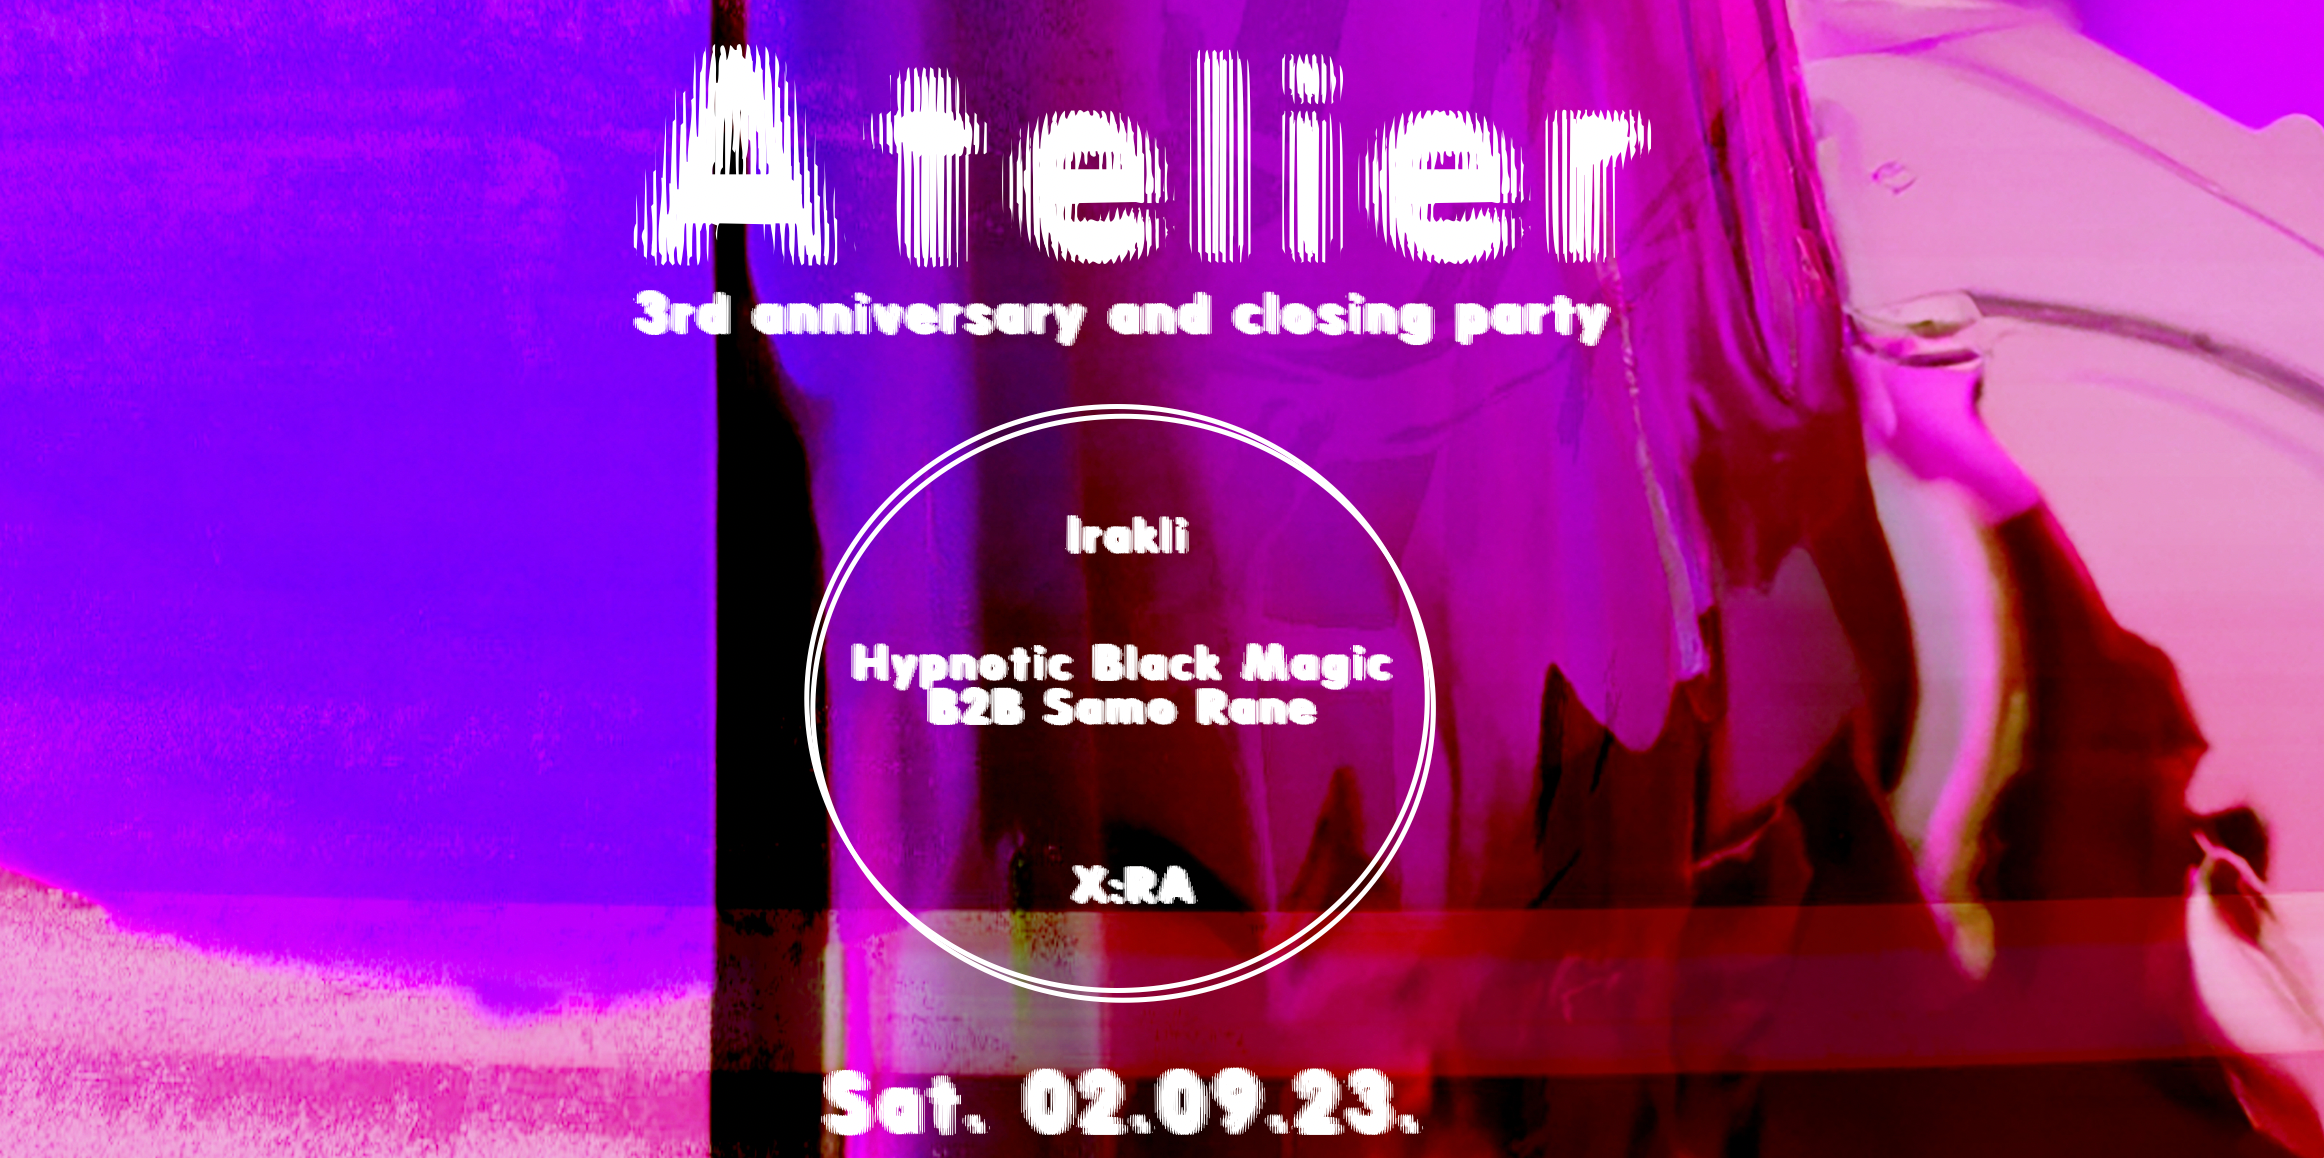 Atelier: 3rd Anniversary and Closing party - Página frontal